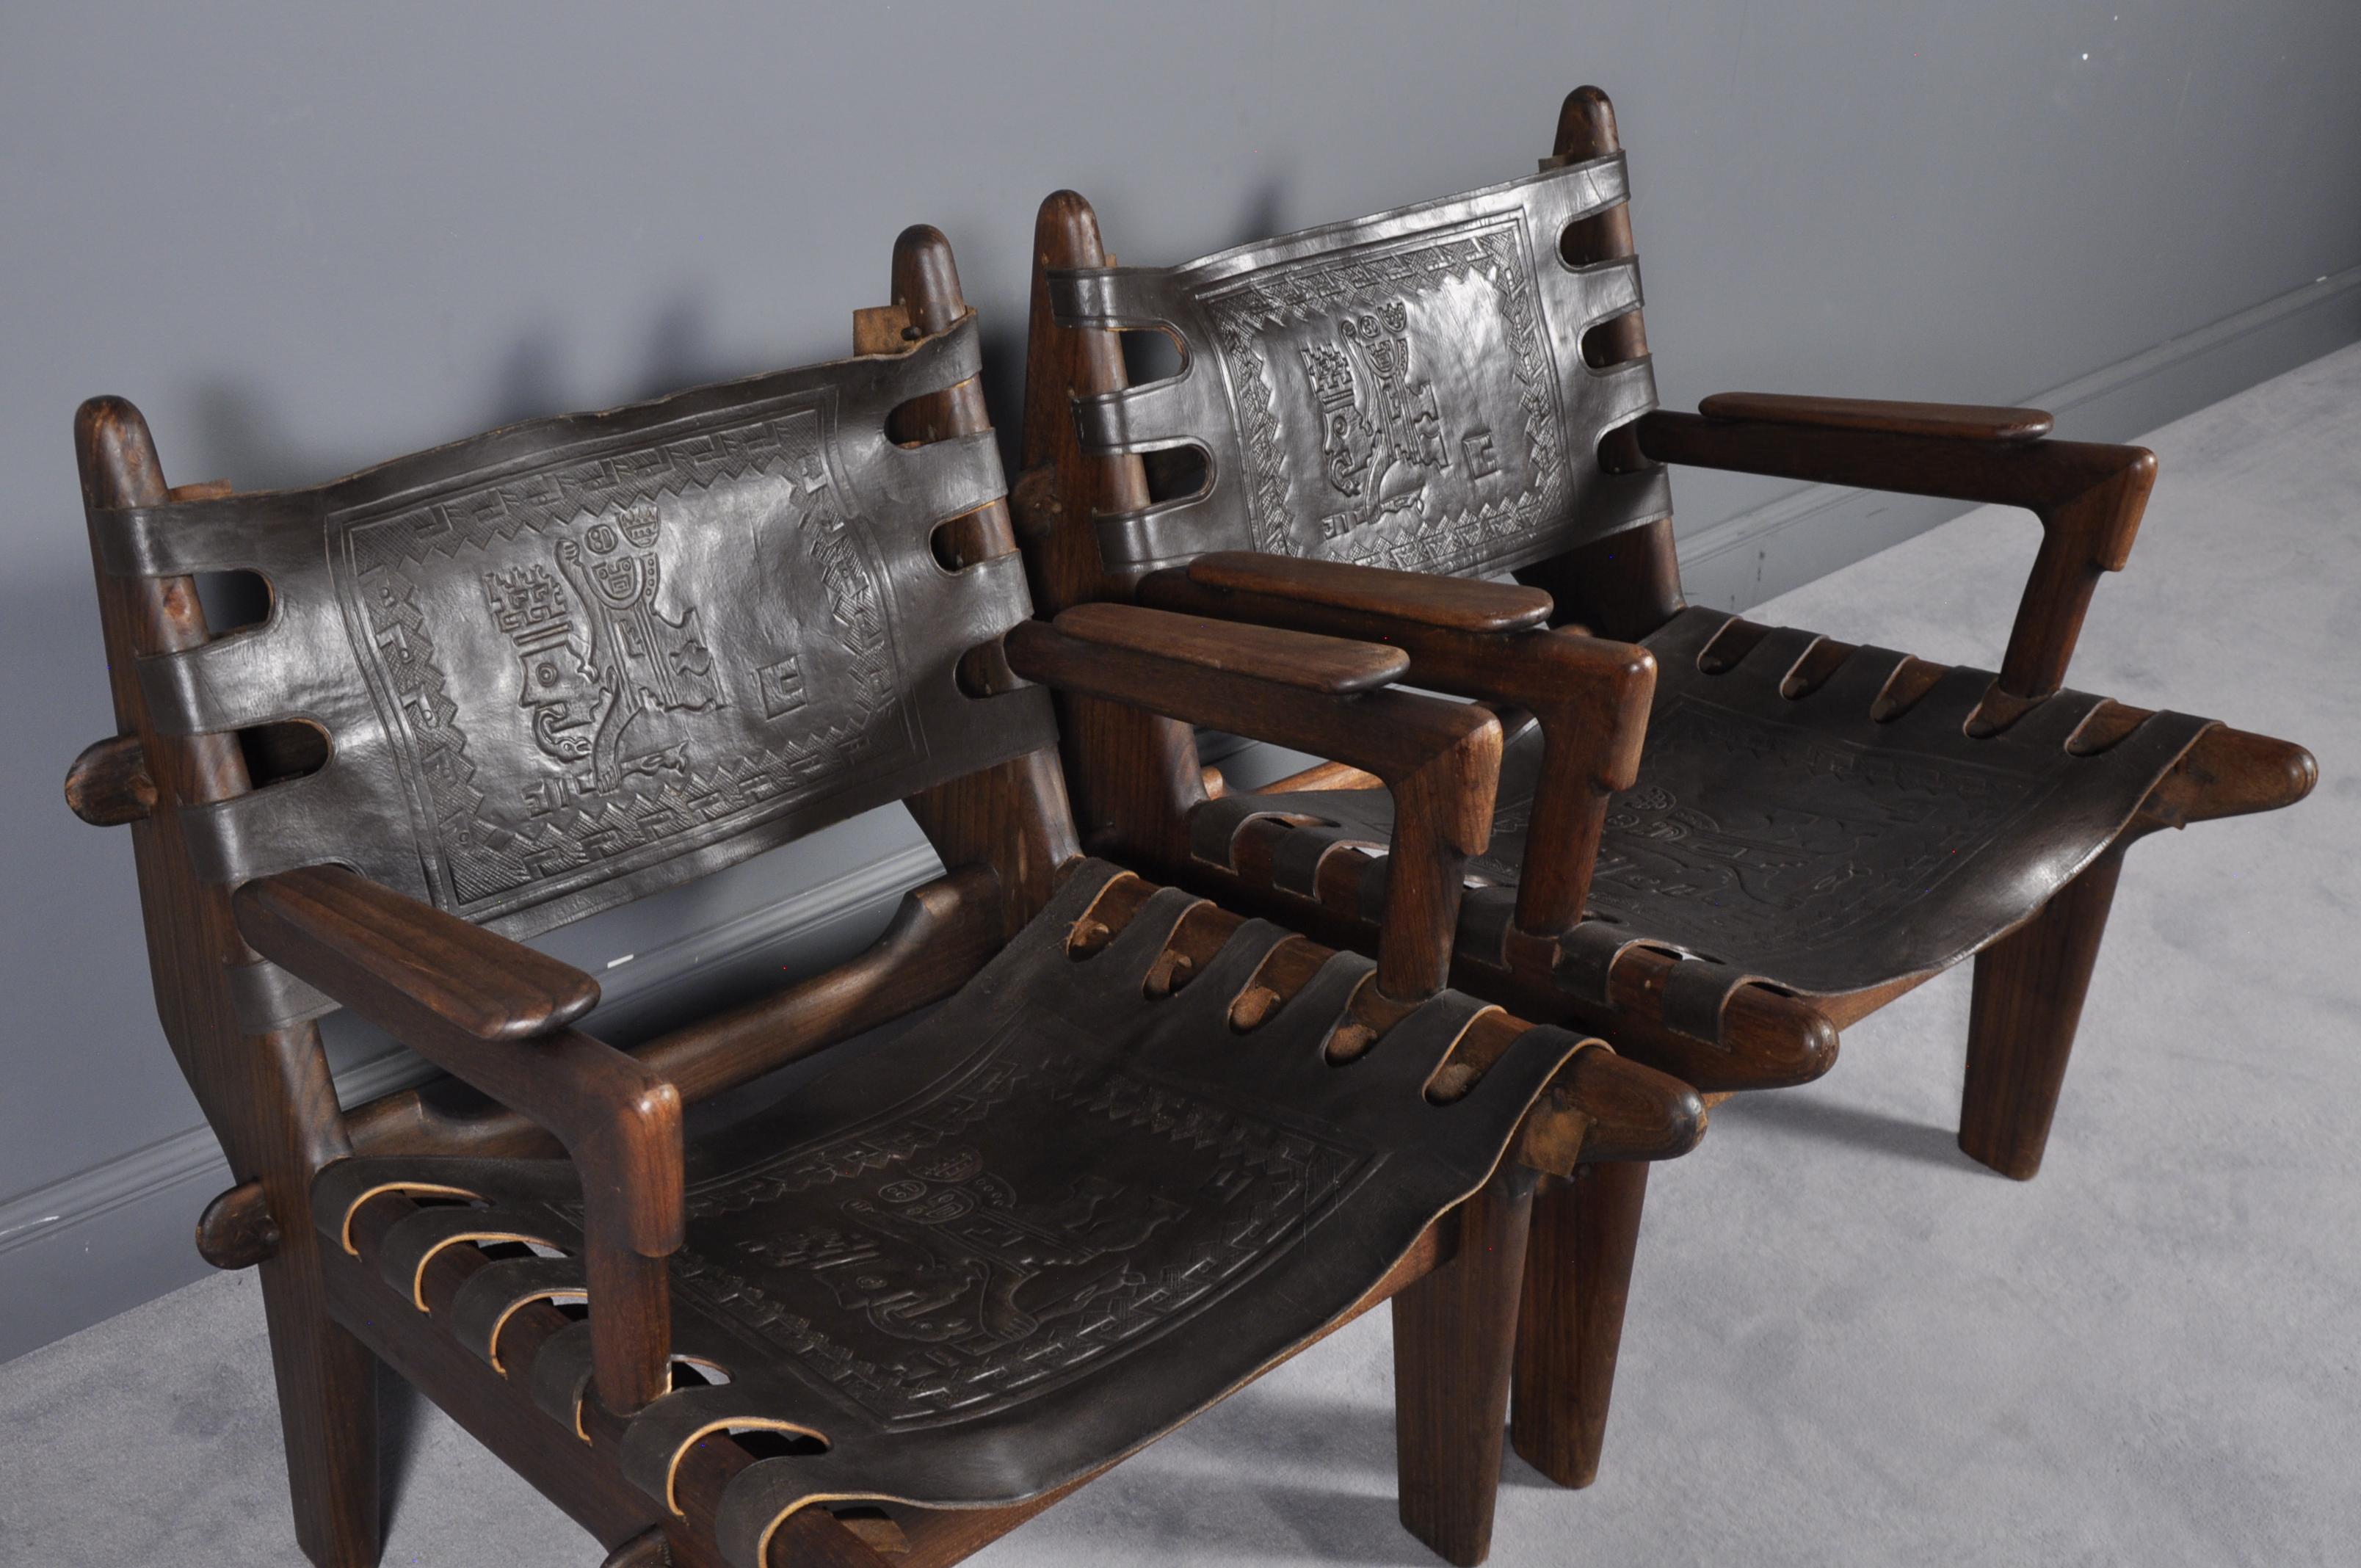 Hand-Crafted Pair of Angel I. Pazmino Teak and Leather Armchairs for Muebles de Estilo, 1960s